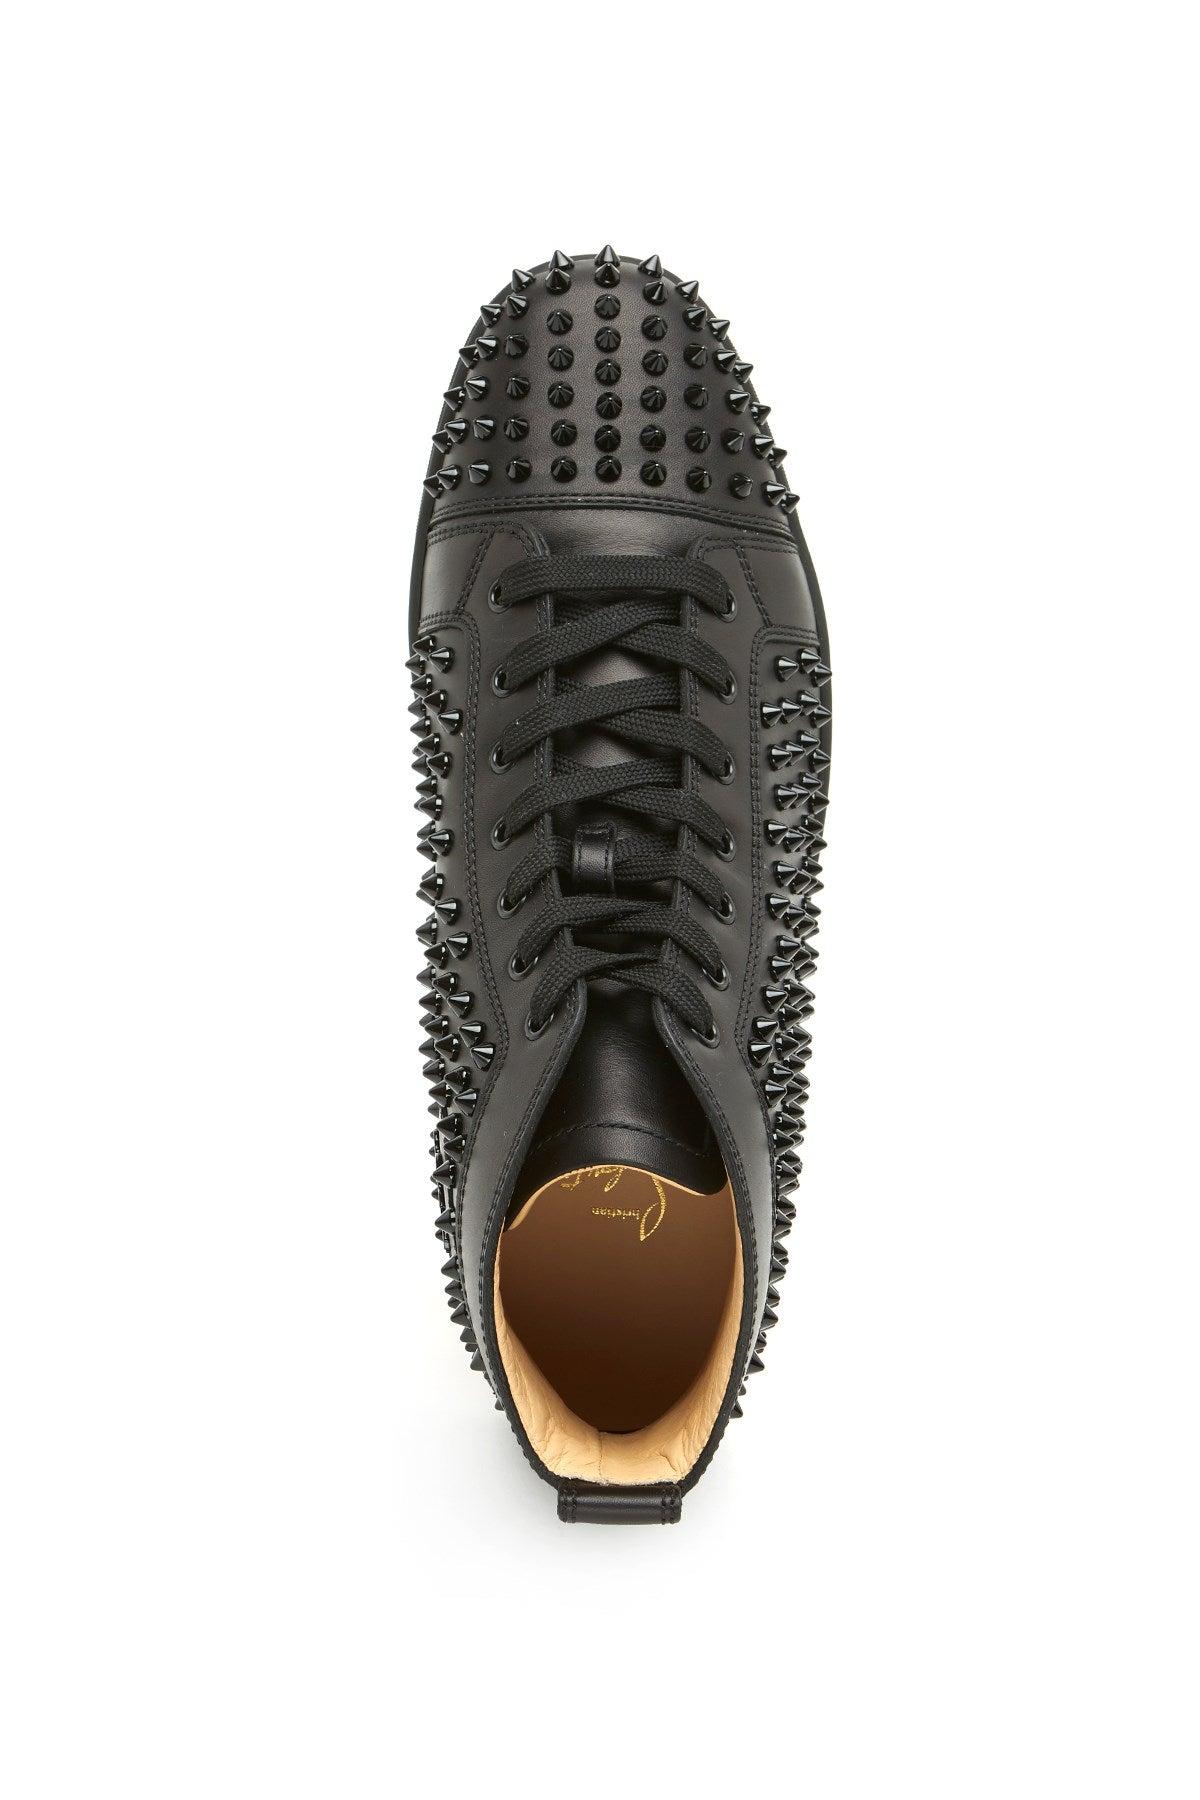 Lou Spikes - Sneakers - Suede calf and spikes - Black - Christian